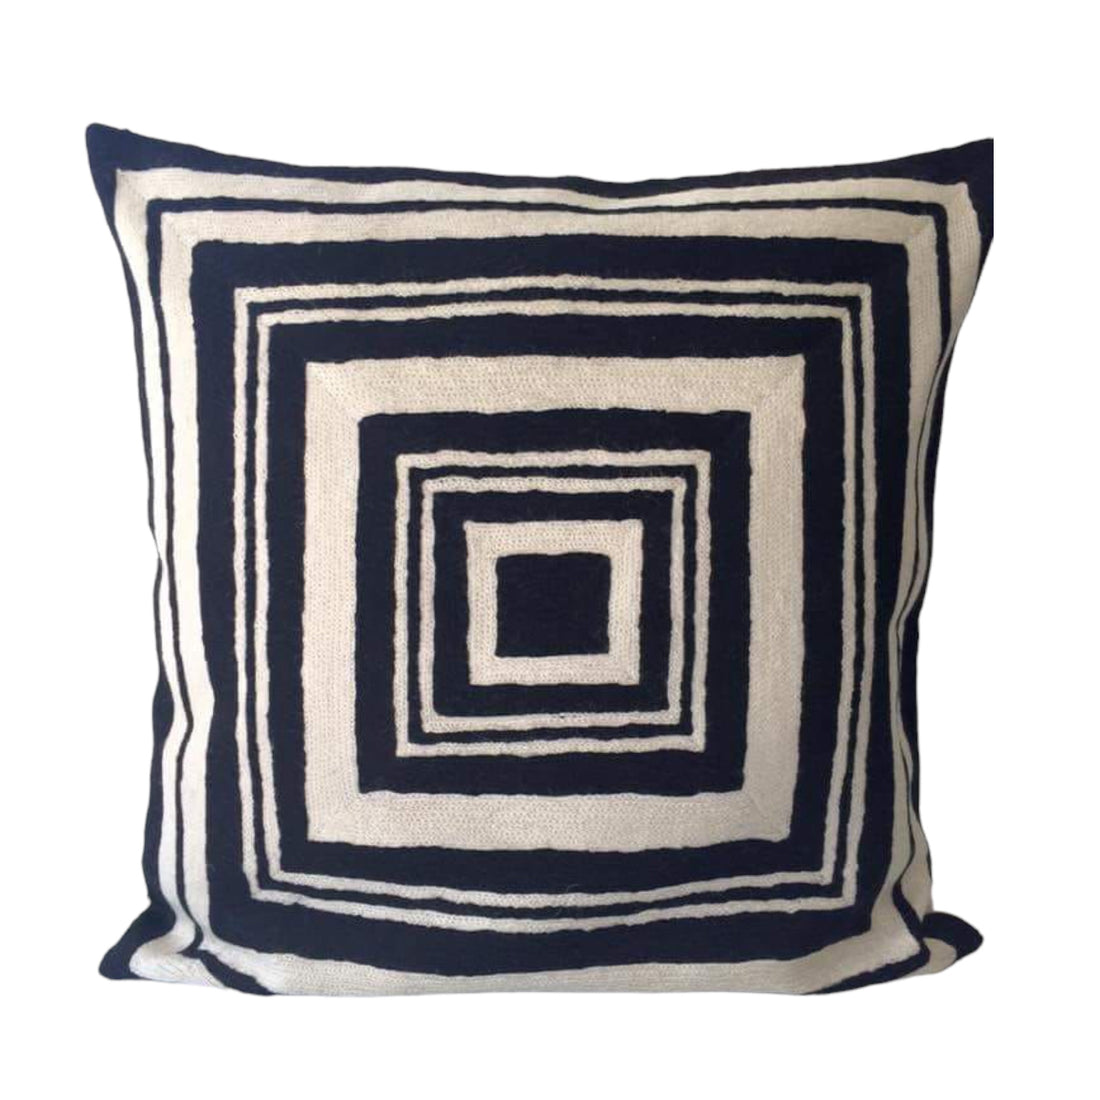 Black Square Crewel Wool Cushion Cover